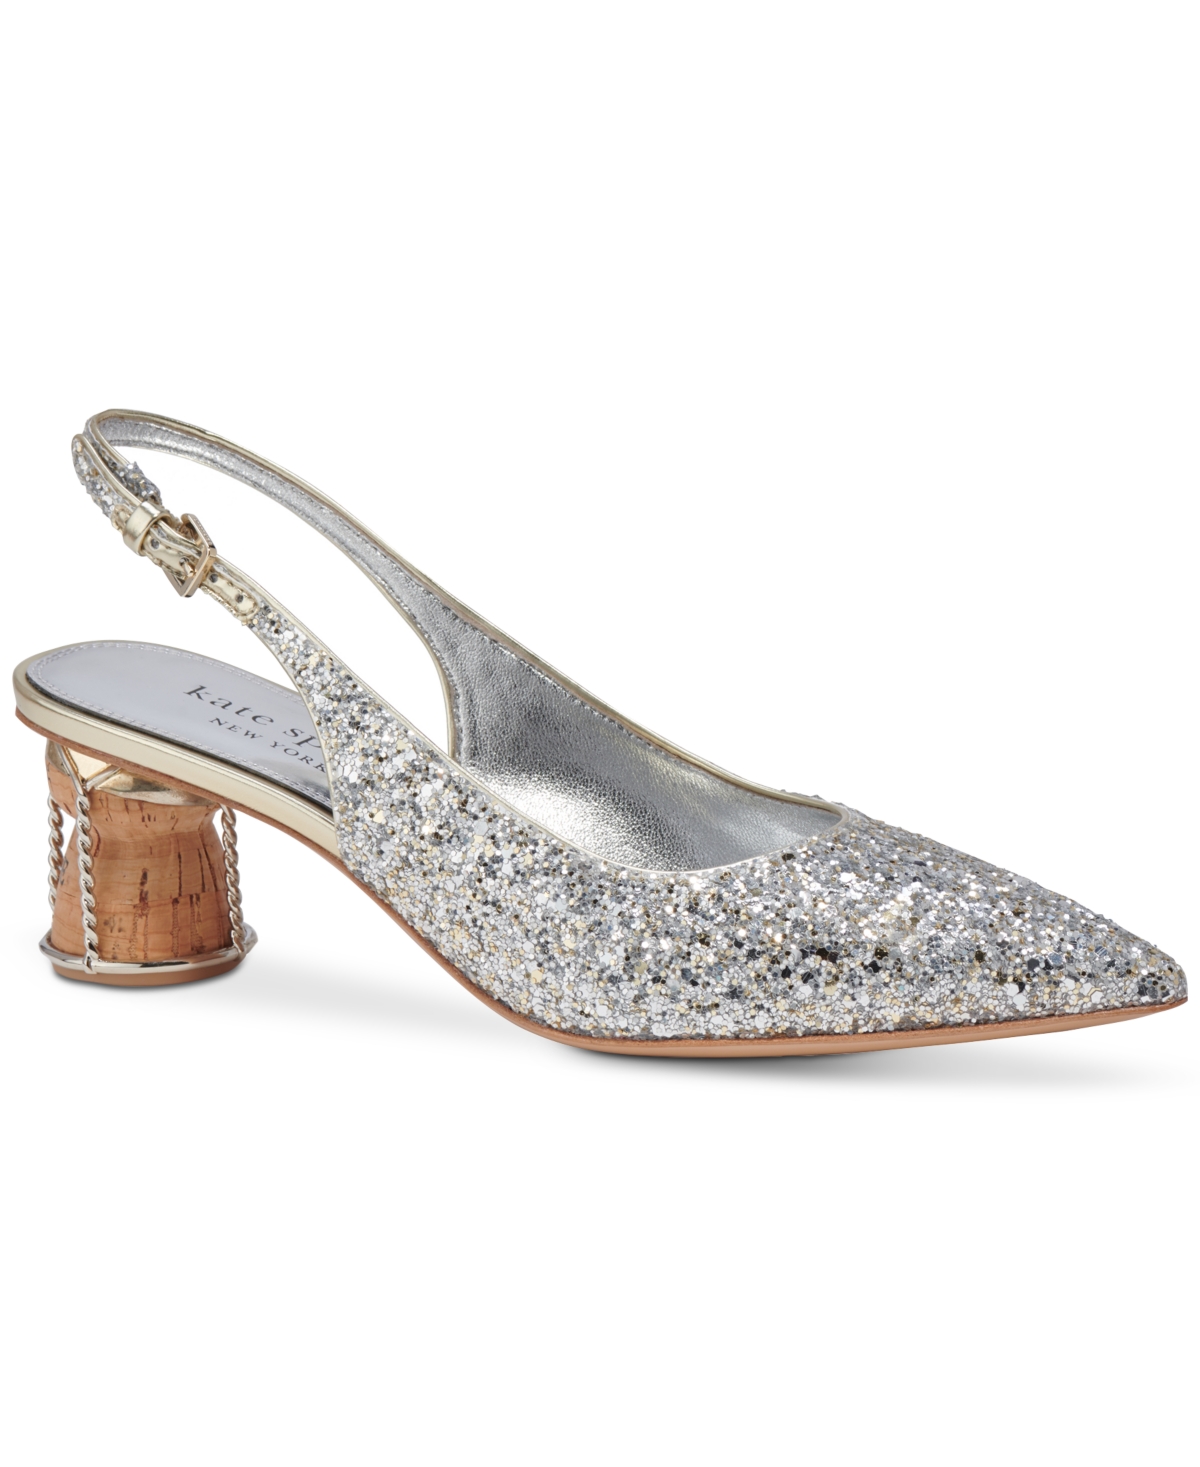 Women's Soiree Pointed-Toe Slingback Pumps - Gold, Silver